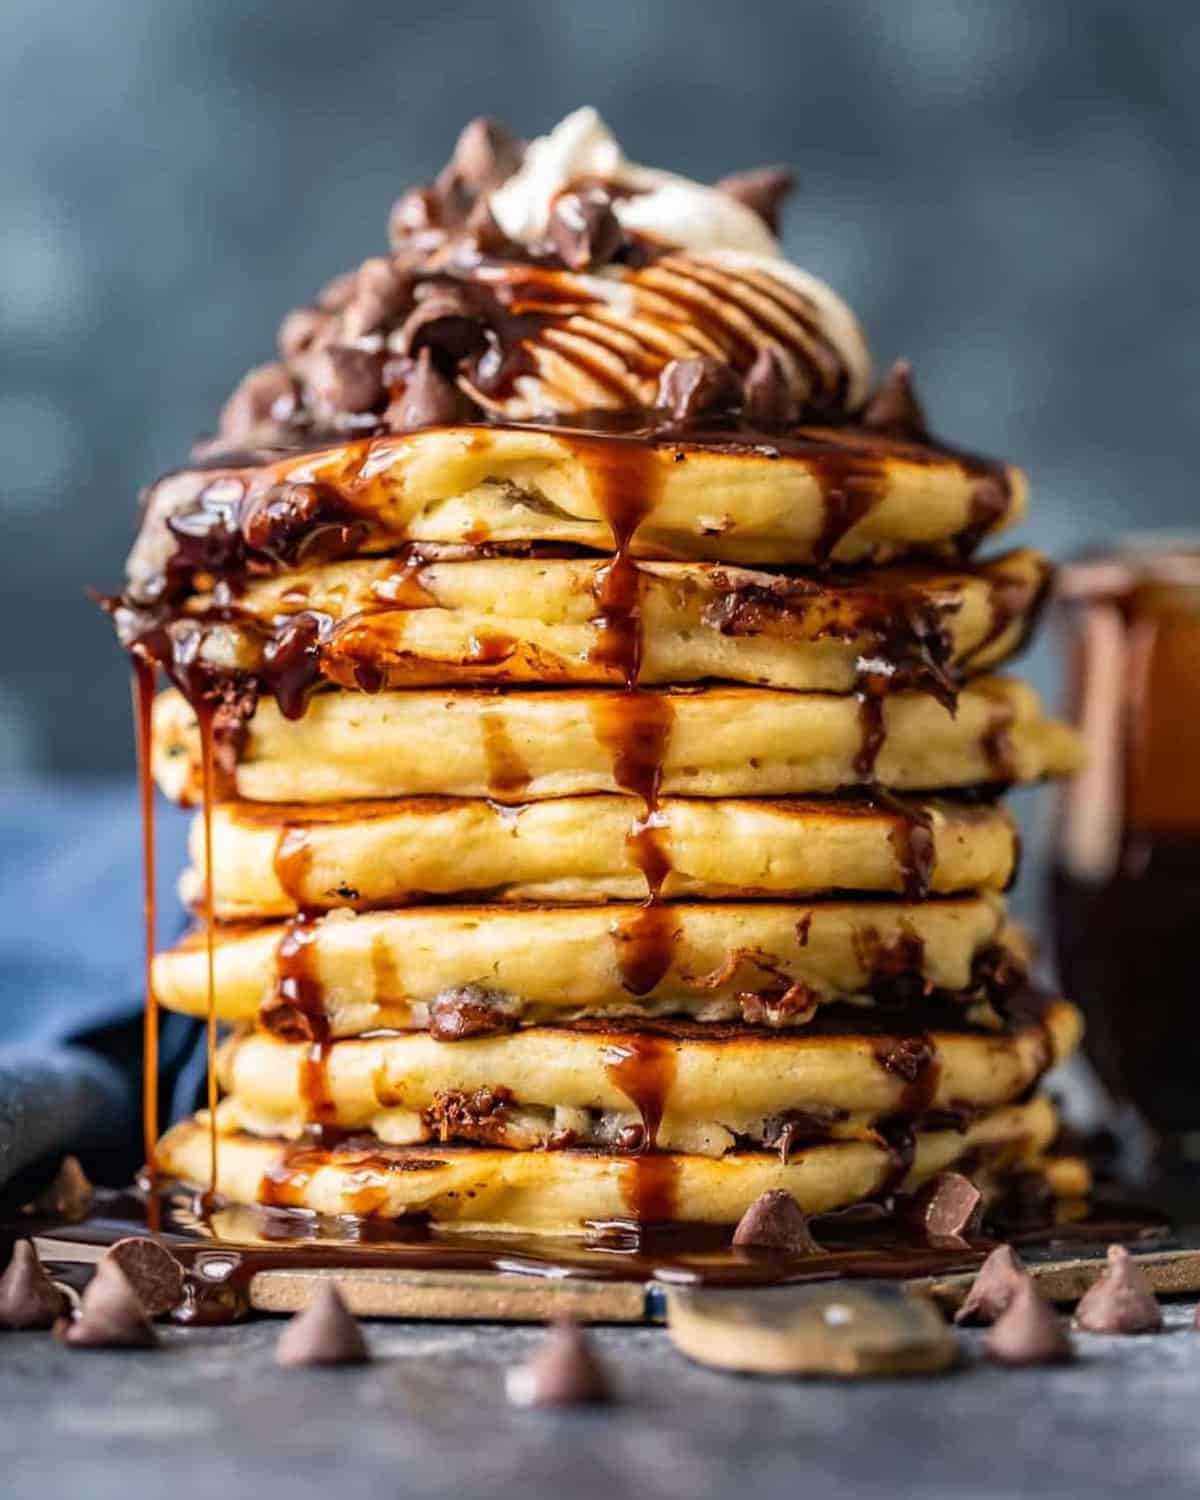 A stack of chocolate pancakes with chocolate syrup and chocolate chips.